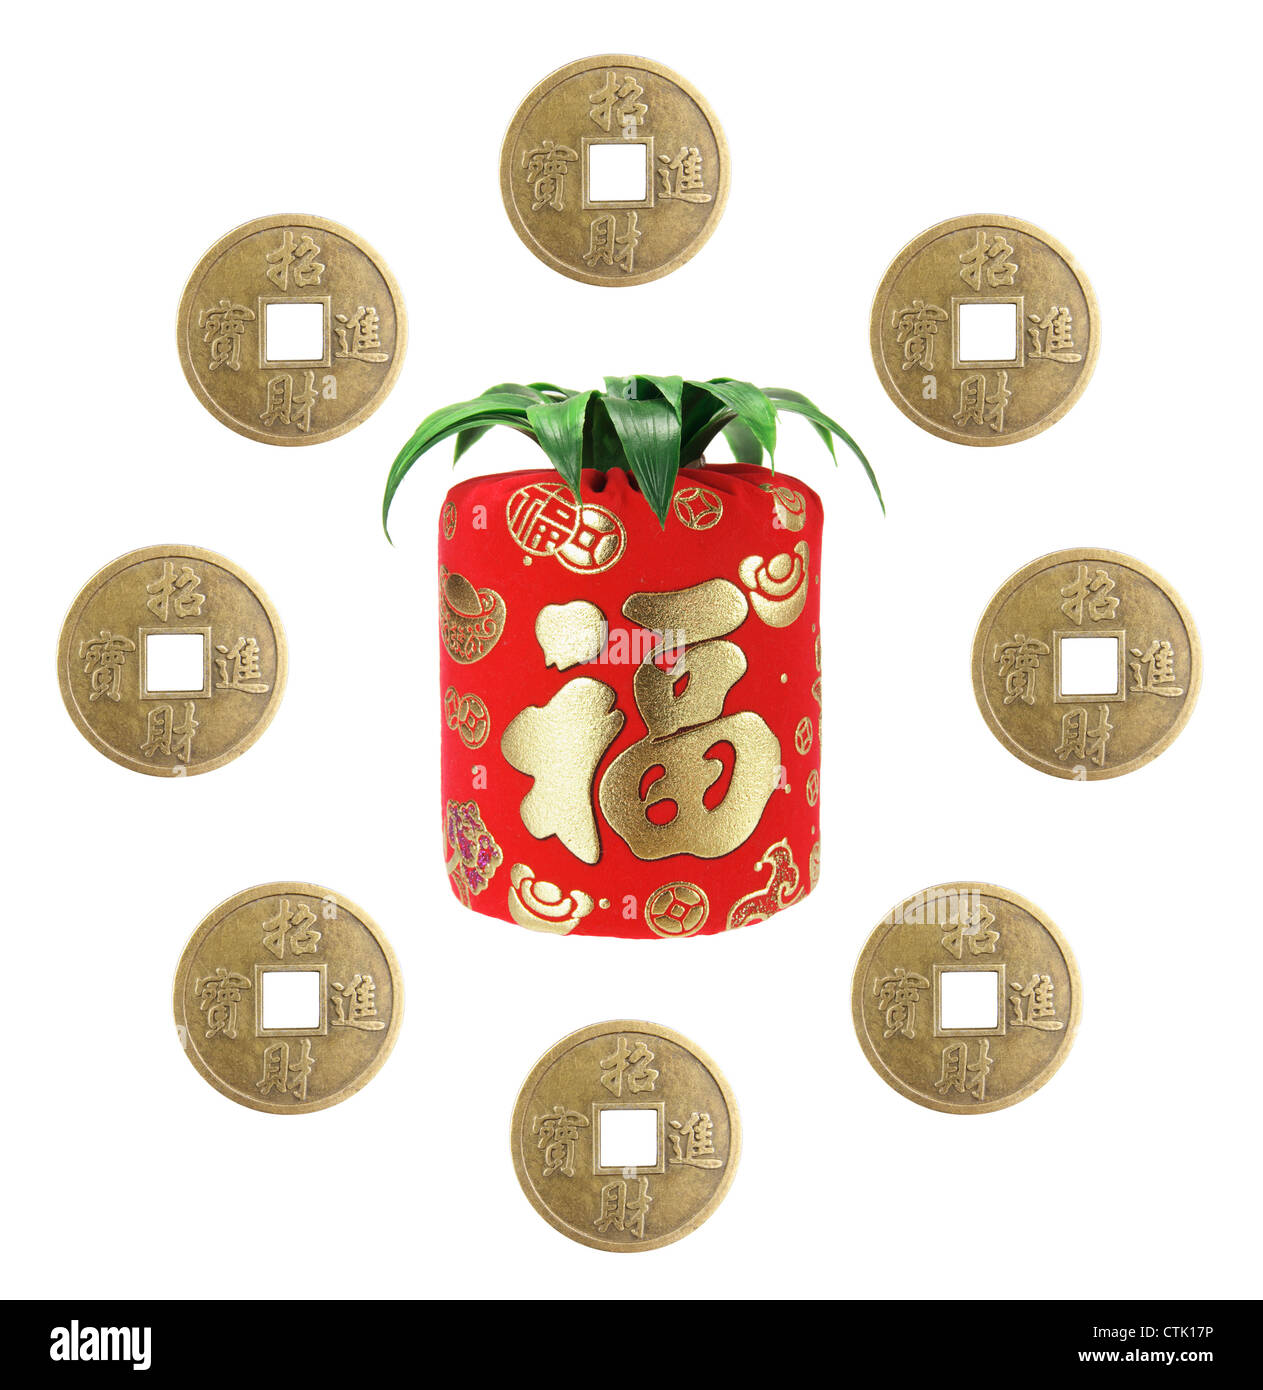 Chinese New Year Decoration with Antique Coins Stock Photo